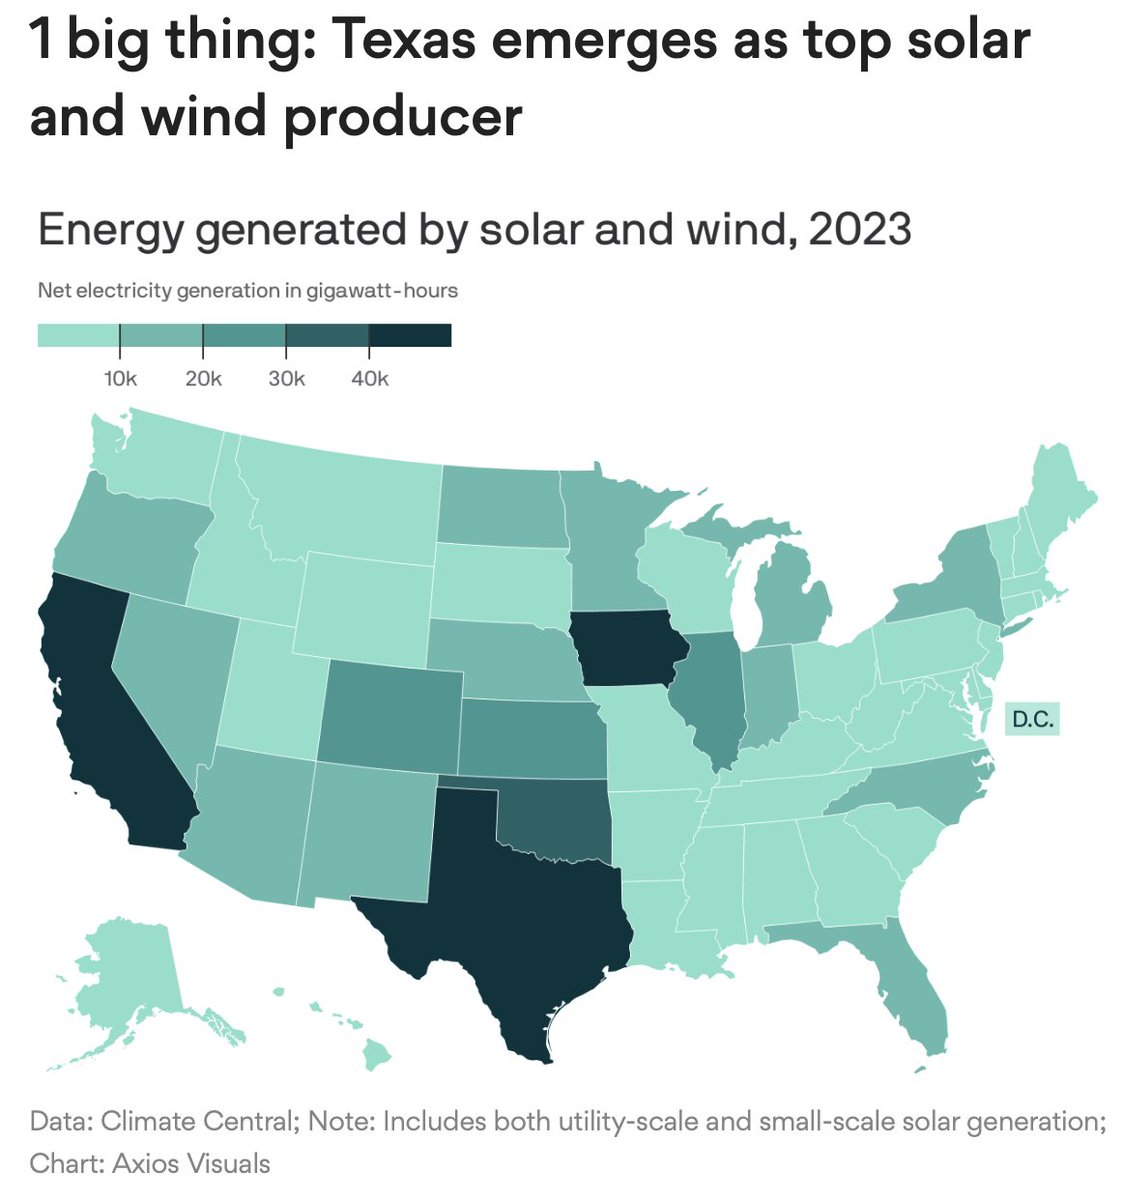 .@axios: Texas is the top producer of solar power and wind energy in the country axios.com/local/austin/2… #txlege